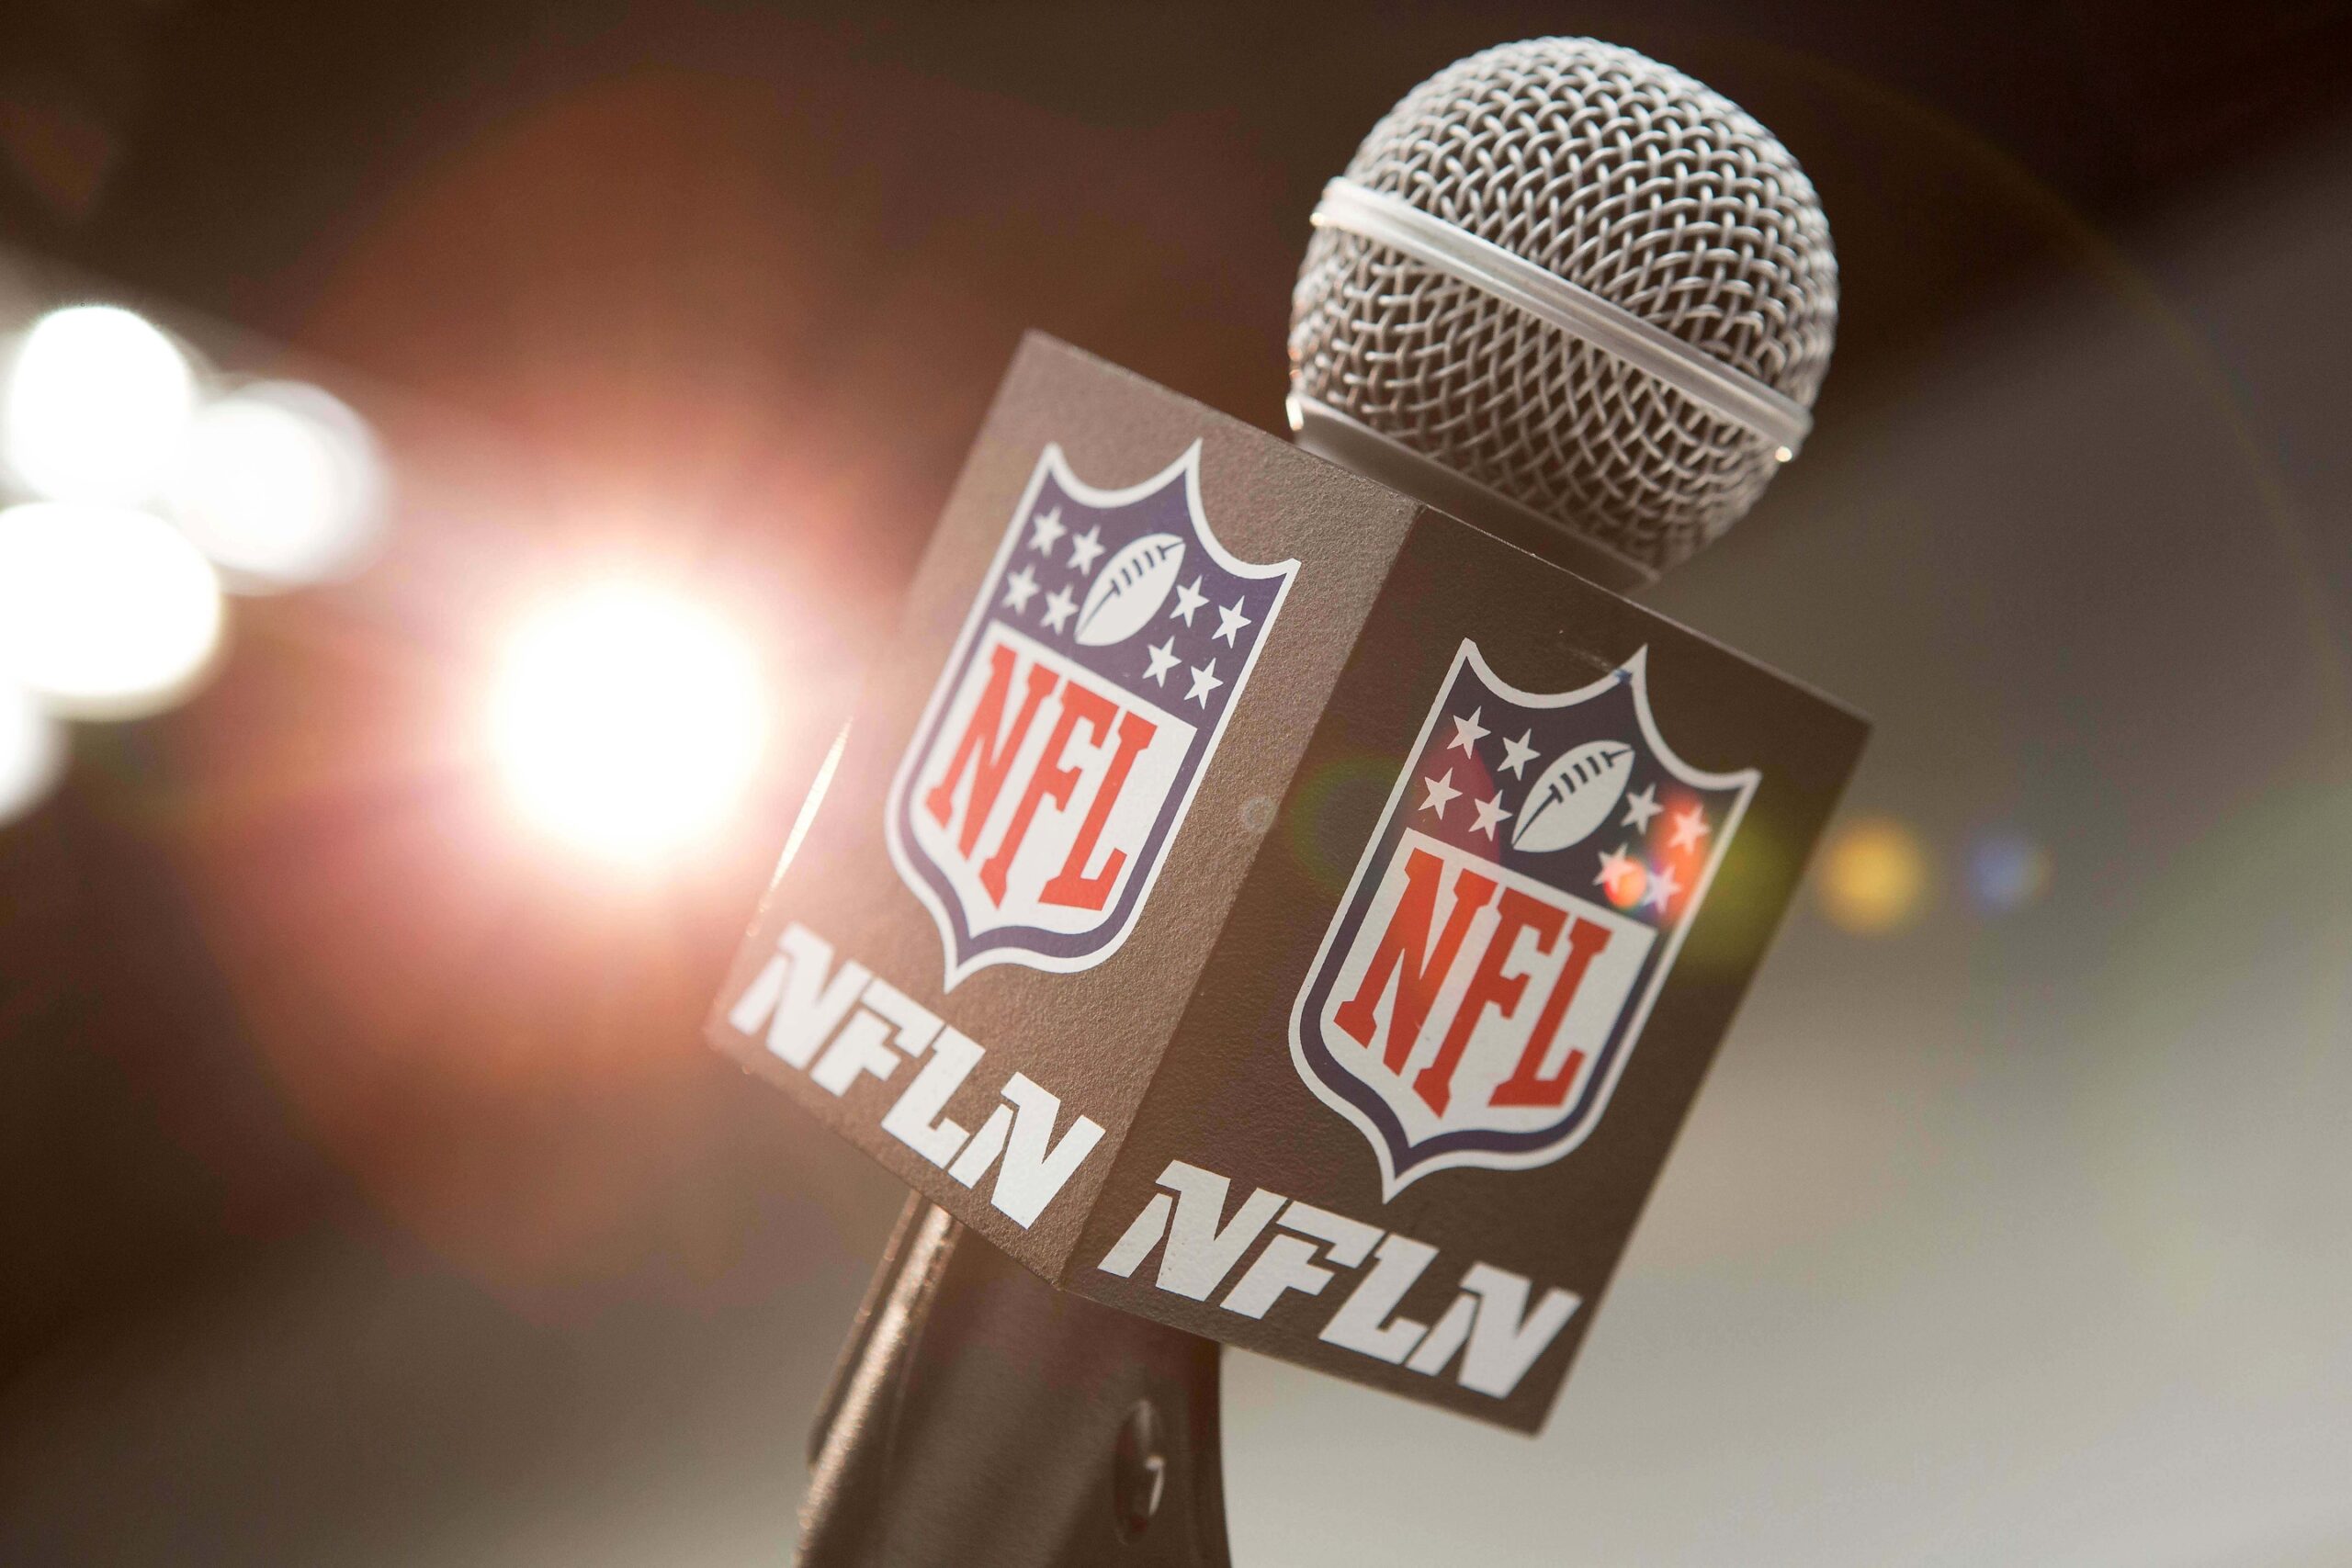 NFL Announcers Week 12: CBS and FOX NFL Game Assignments This Week